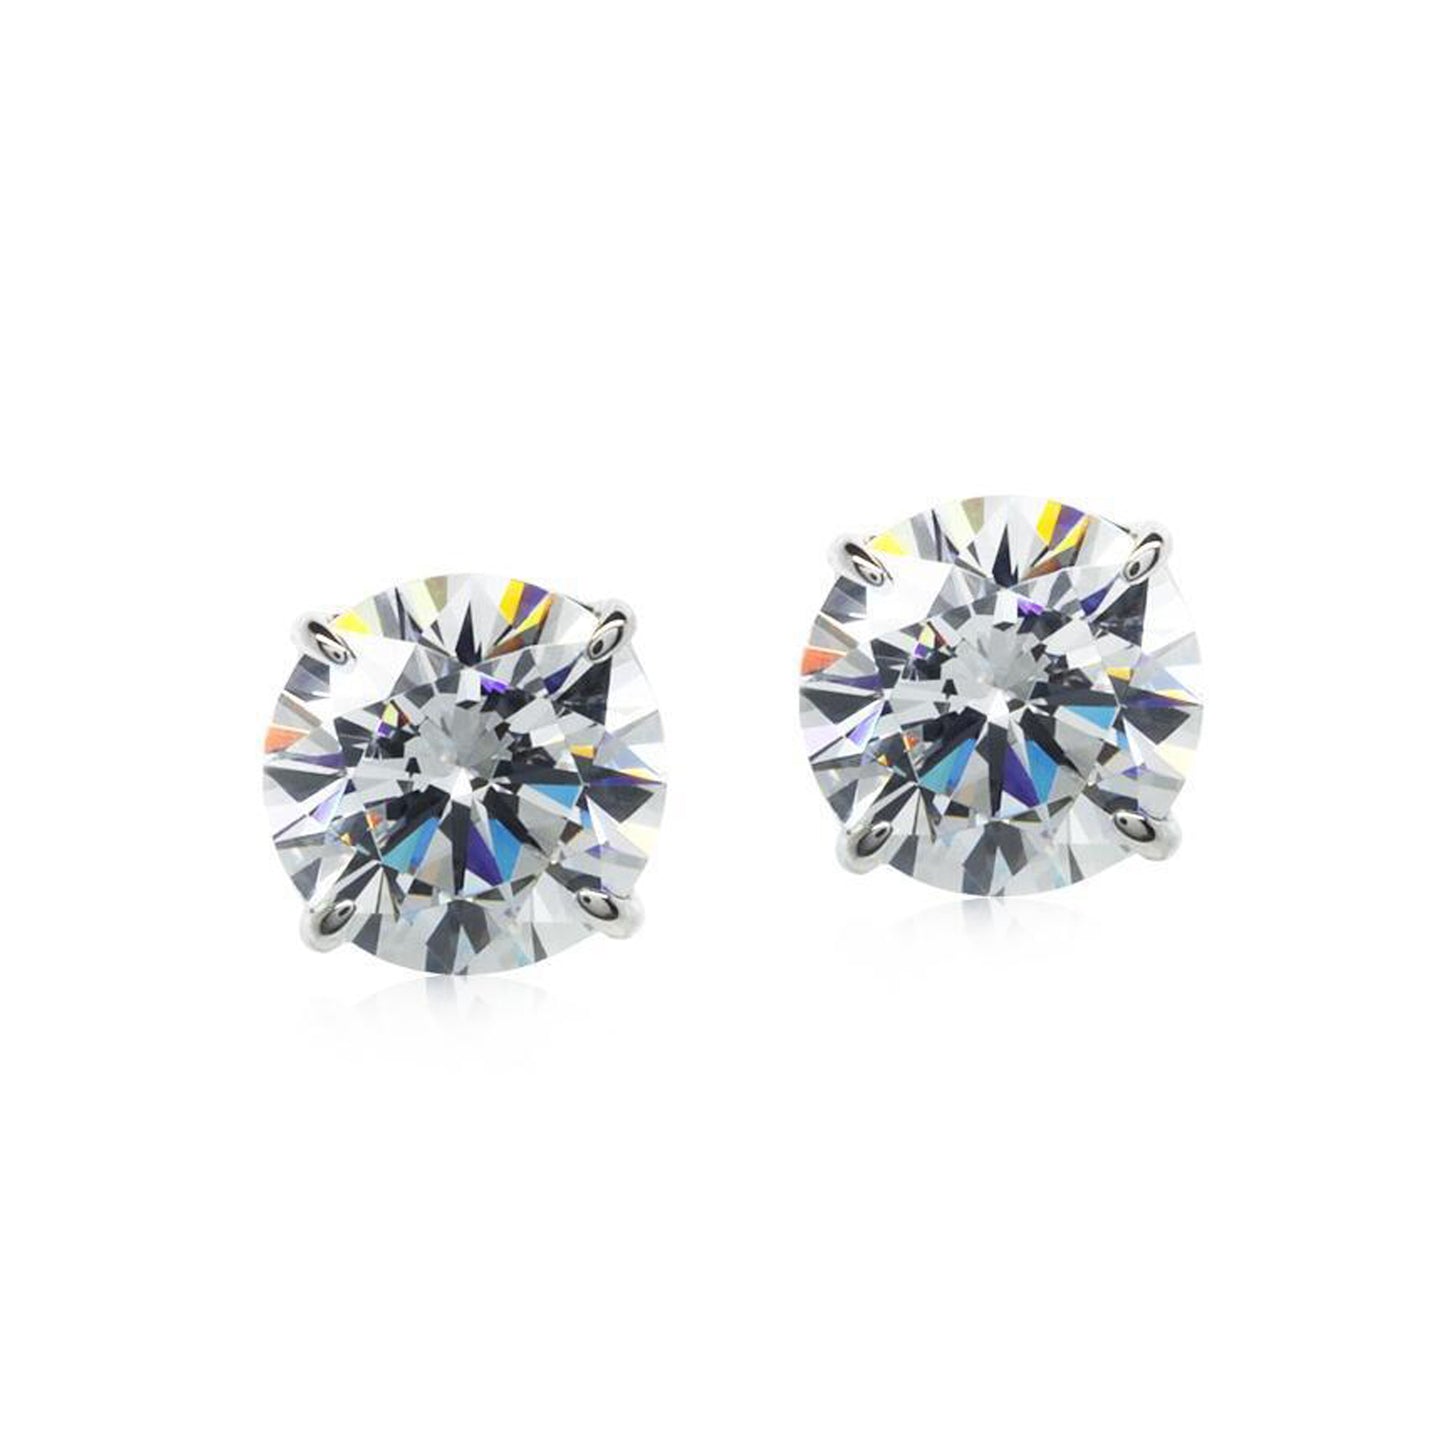 Carat 'Eternal' Four Prong Studs White Gold 1.00ct - CE9KW-ETER-W50